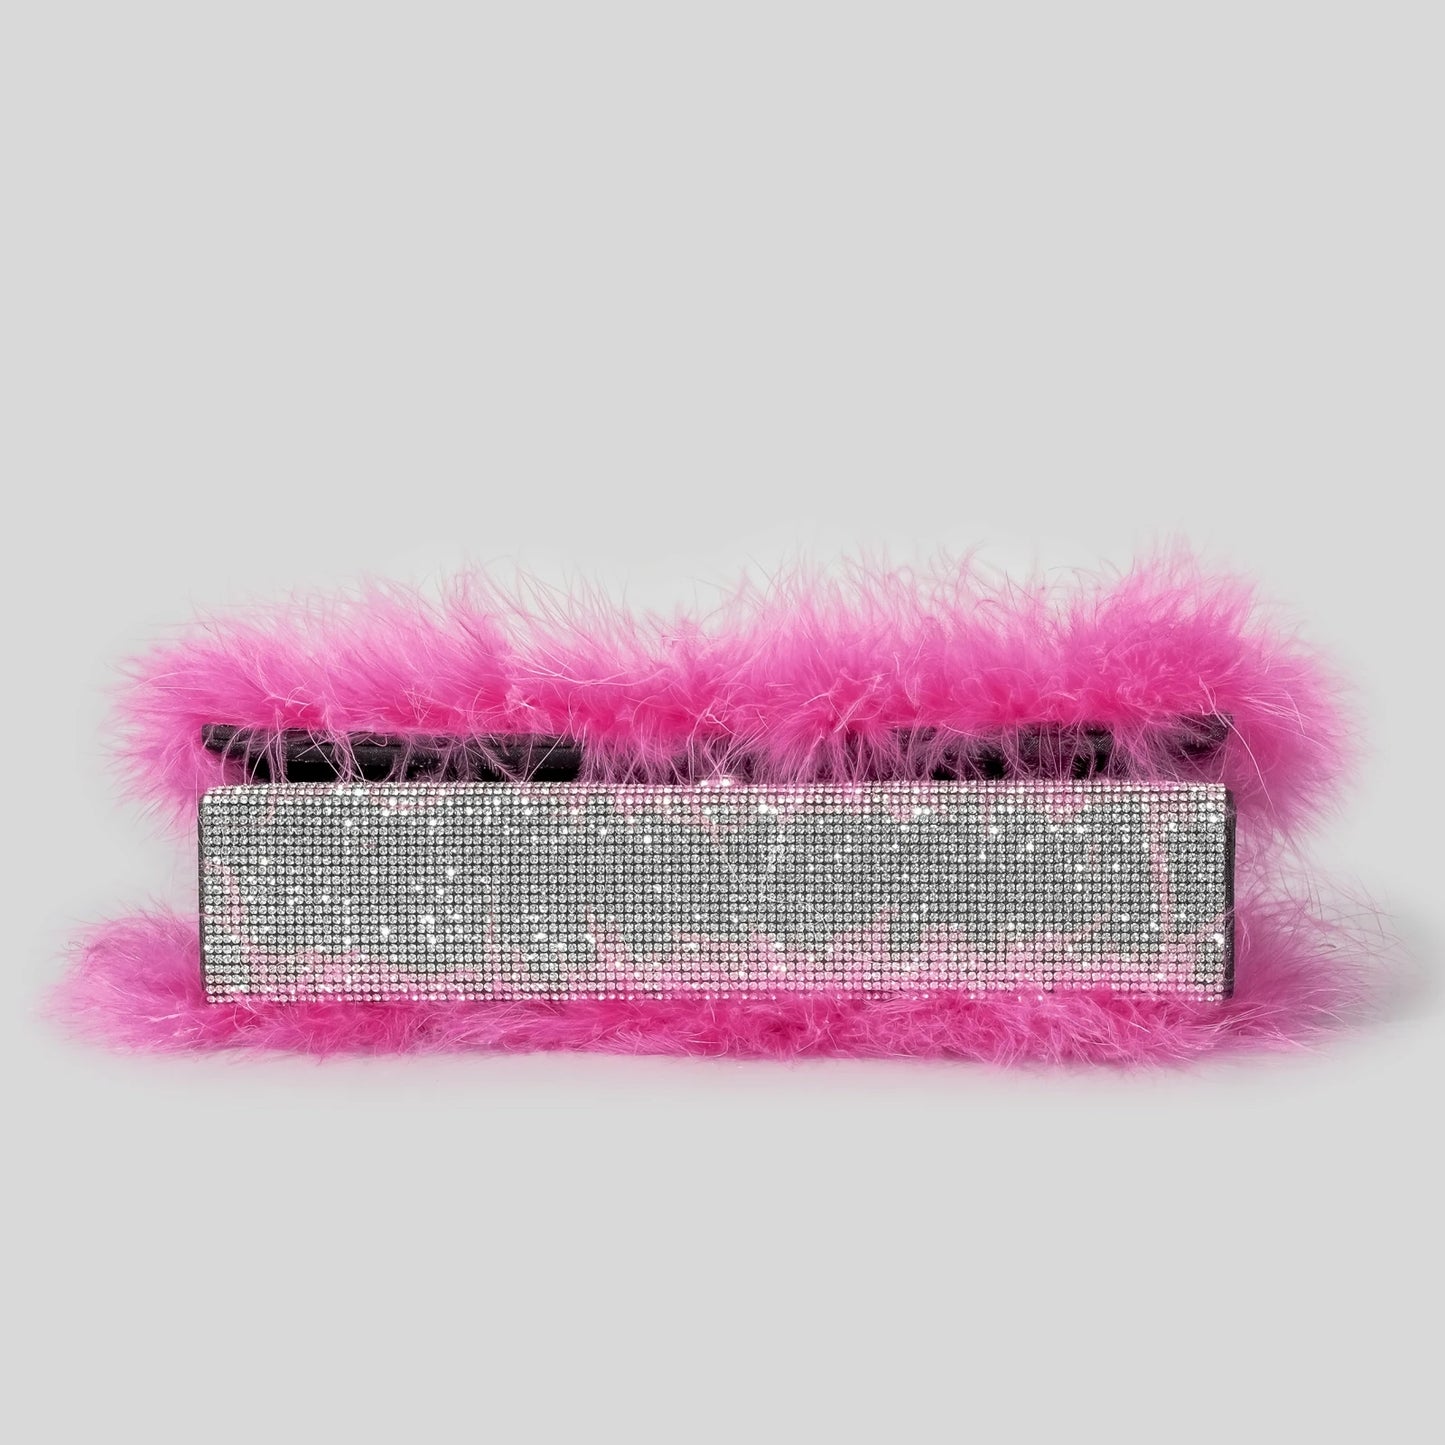 Rhinestone Evening Bag with  Feather Details